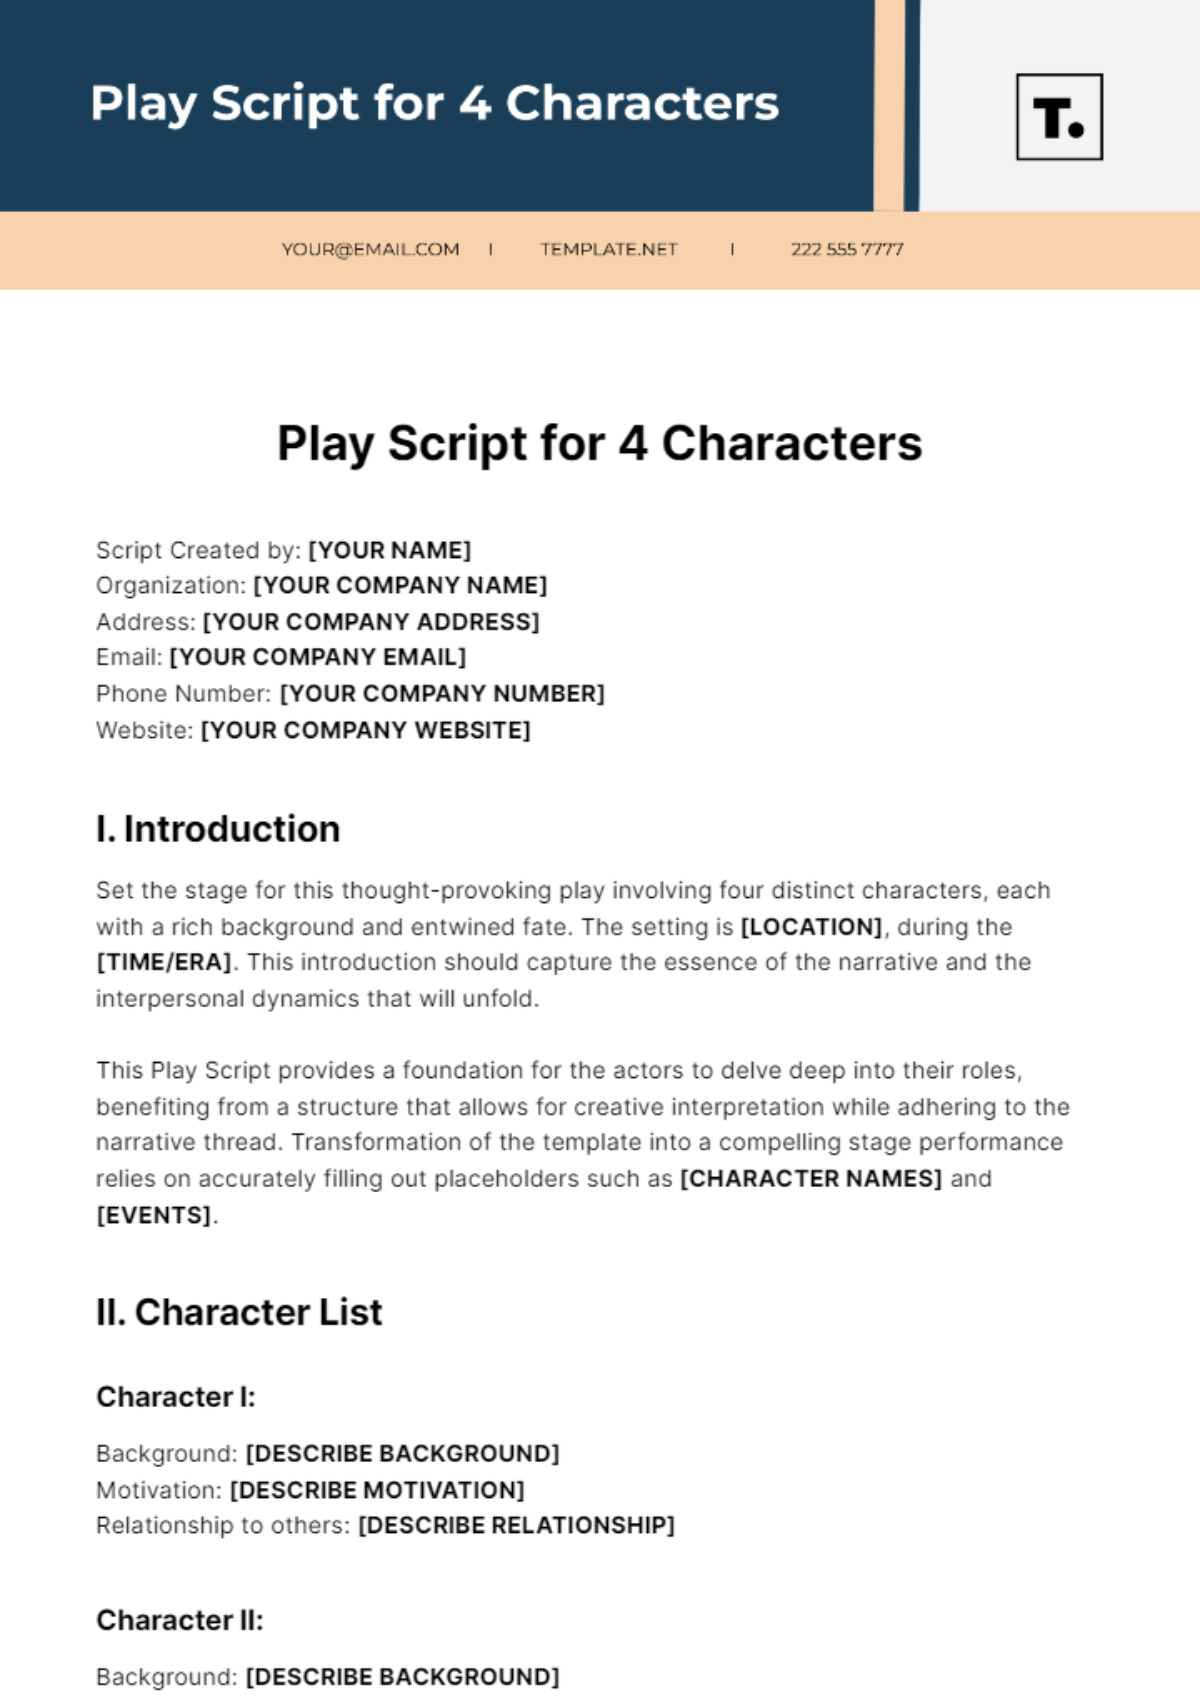 Play Script For 4 Characters Template